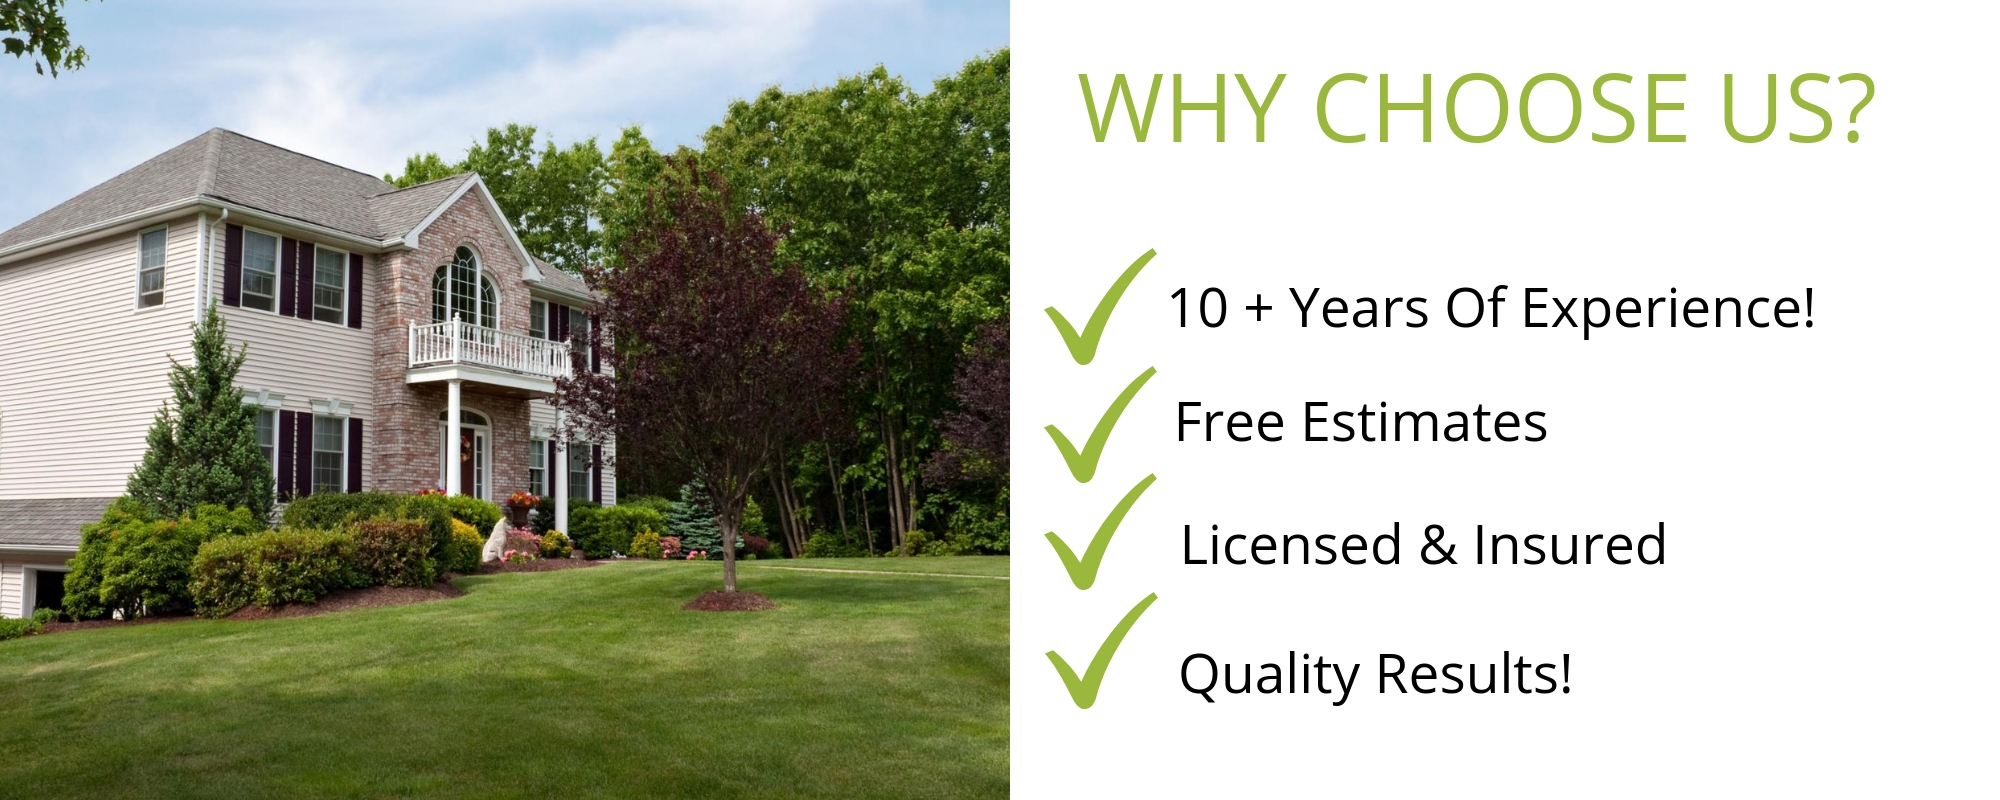 Reason to choose Wierzba for lawn care services! 